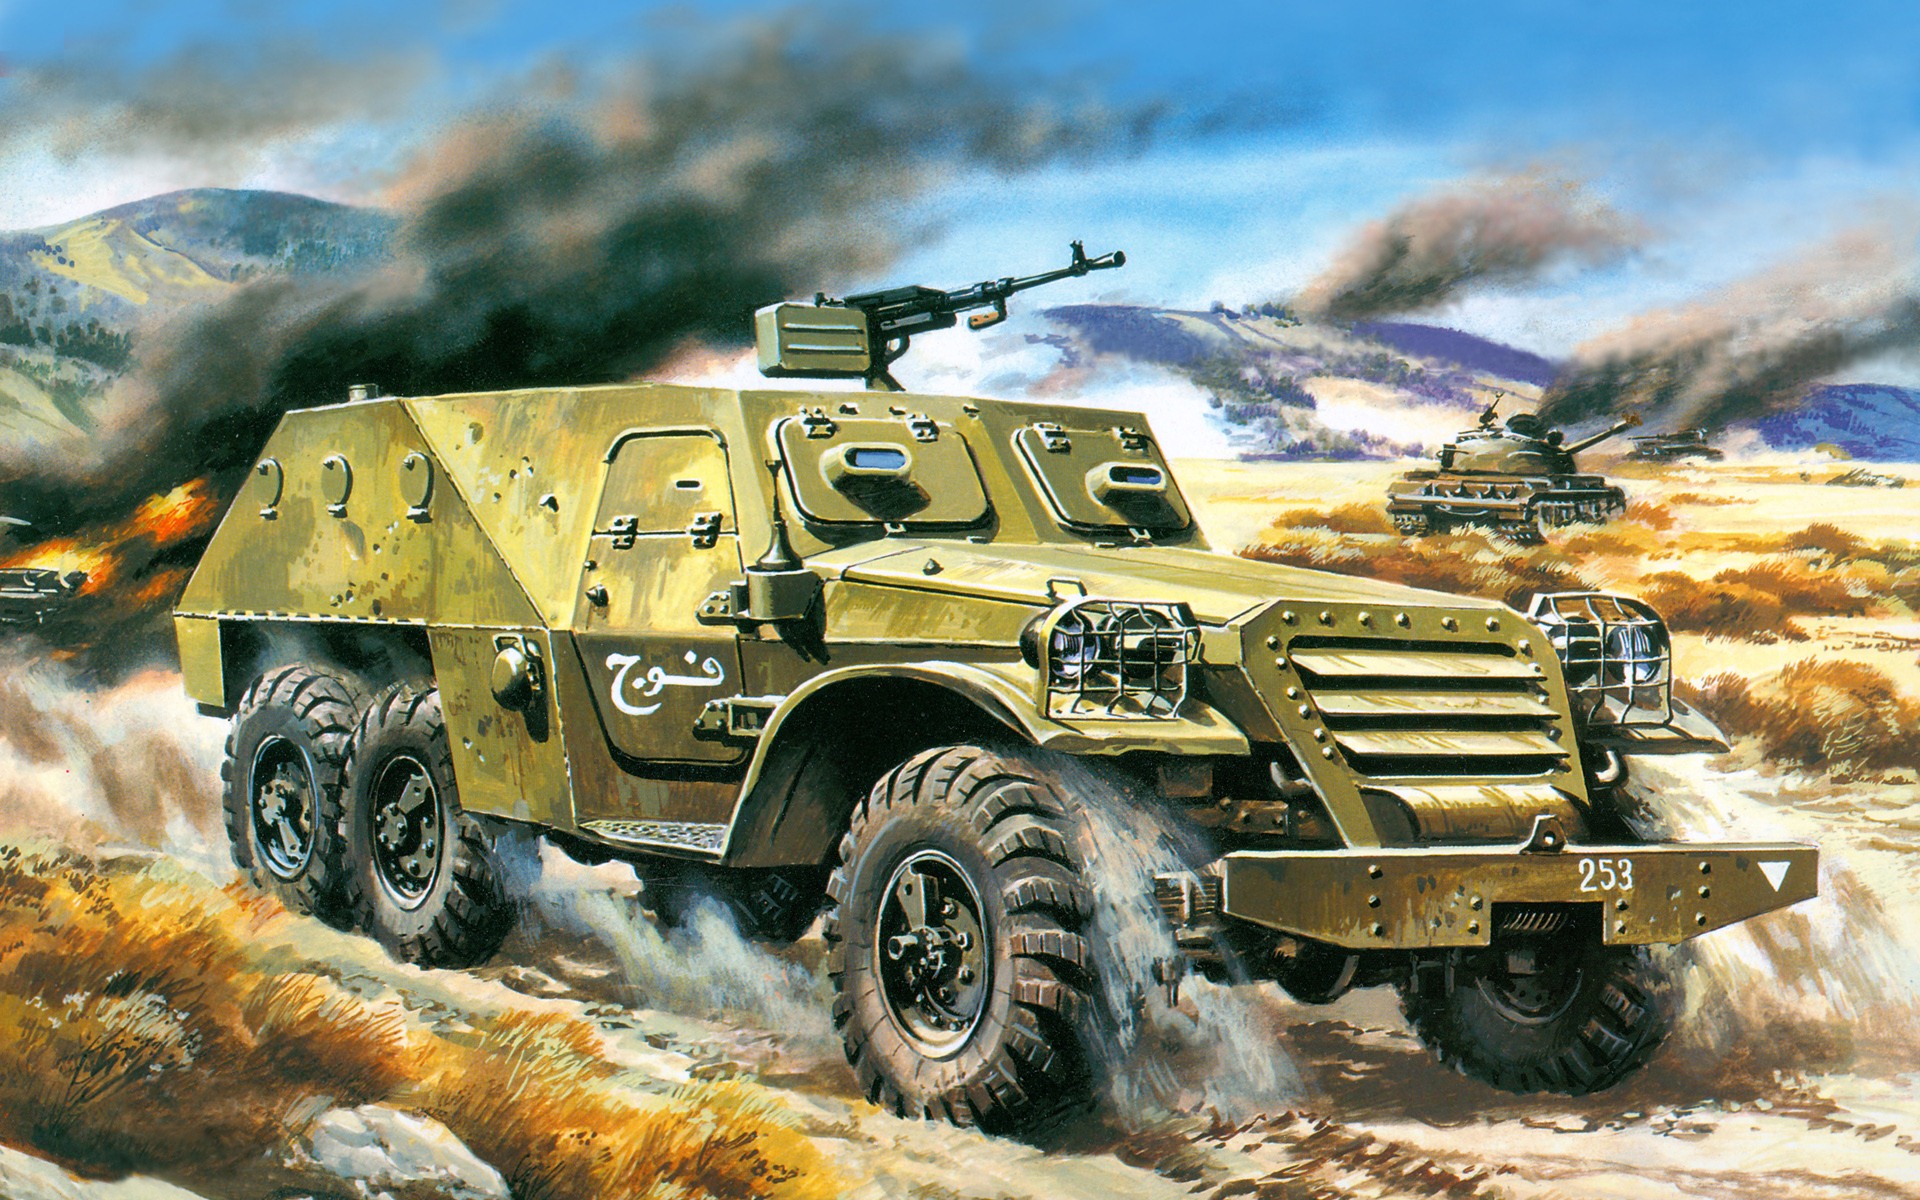 Military tanks, armored HD painting wallpapers #17 - 1920x1200